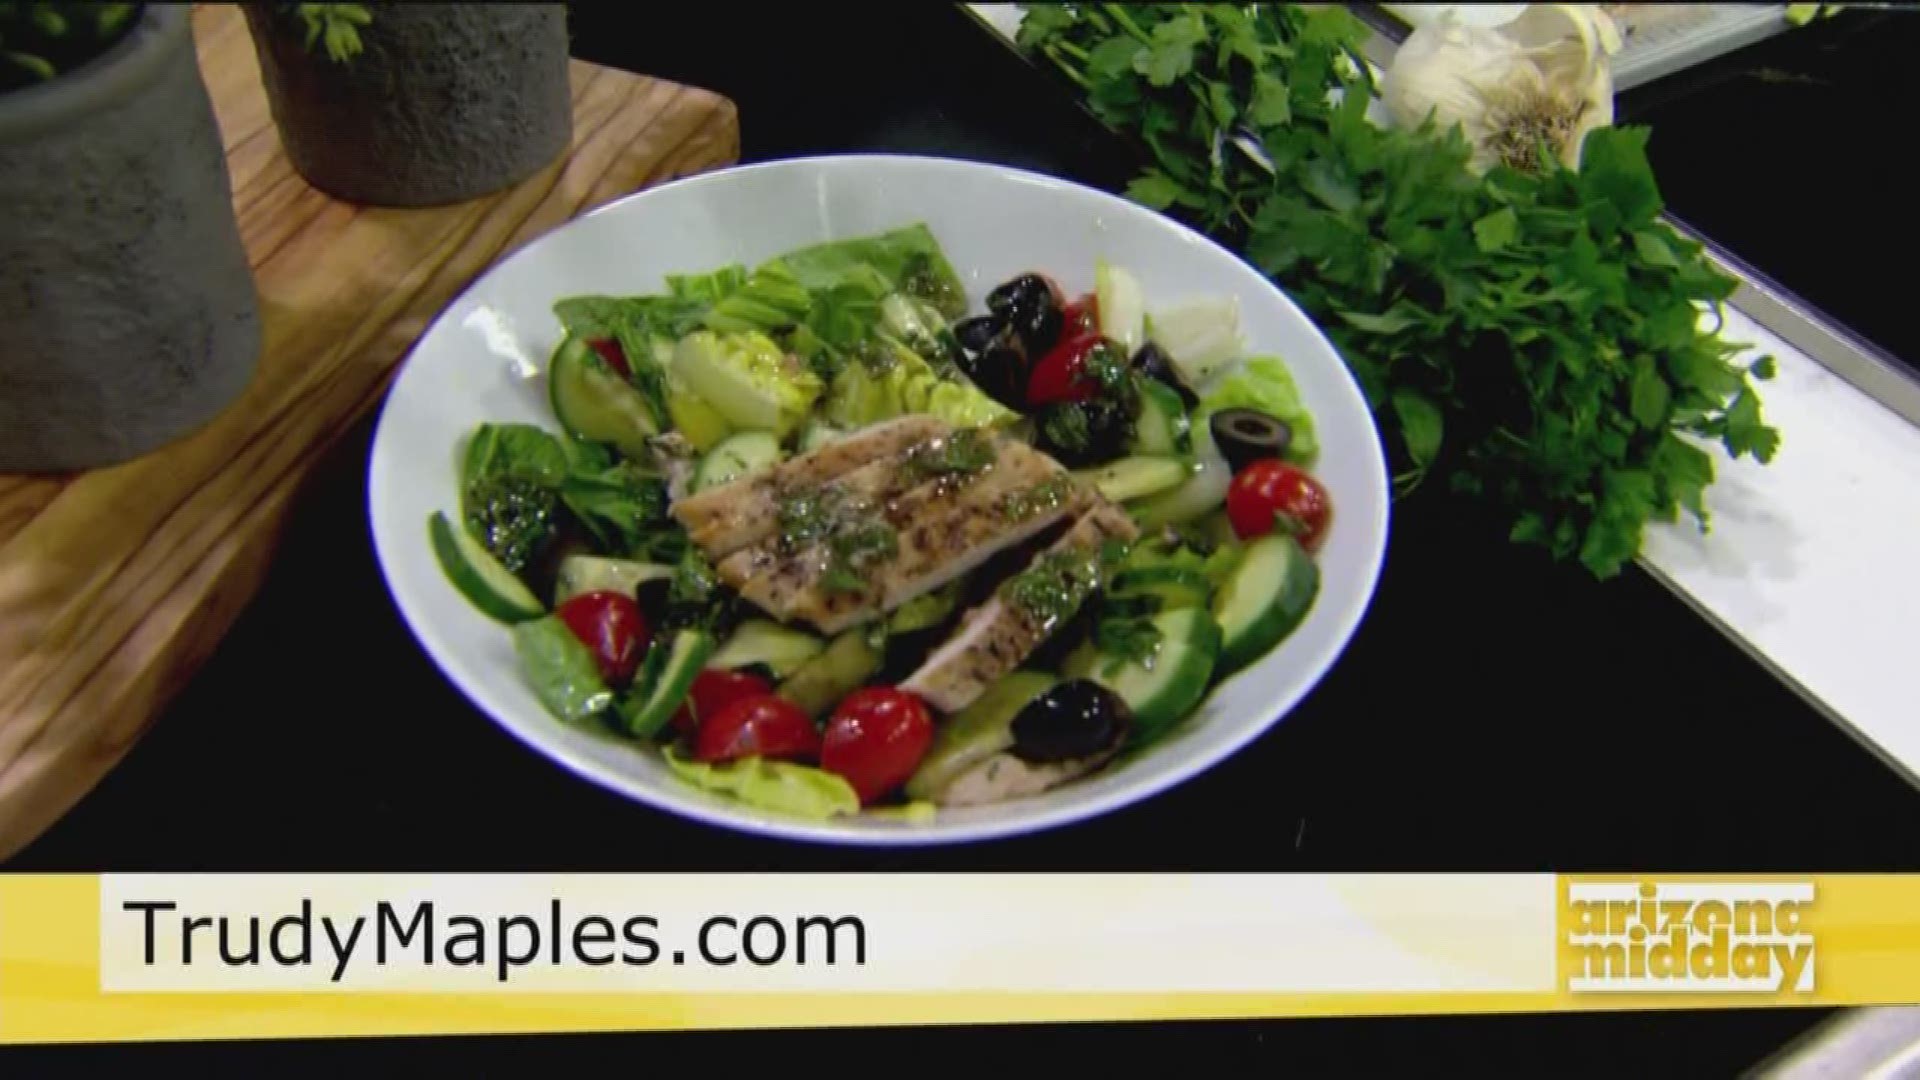 Trudy Maples is inspiring health and wellness with her fresh Italian salad.